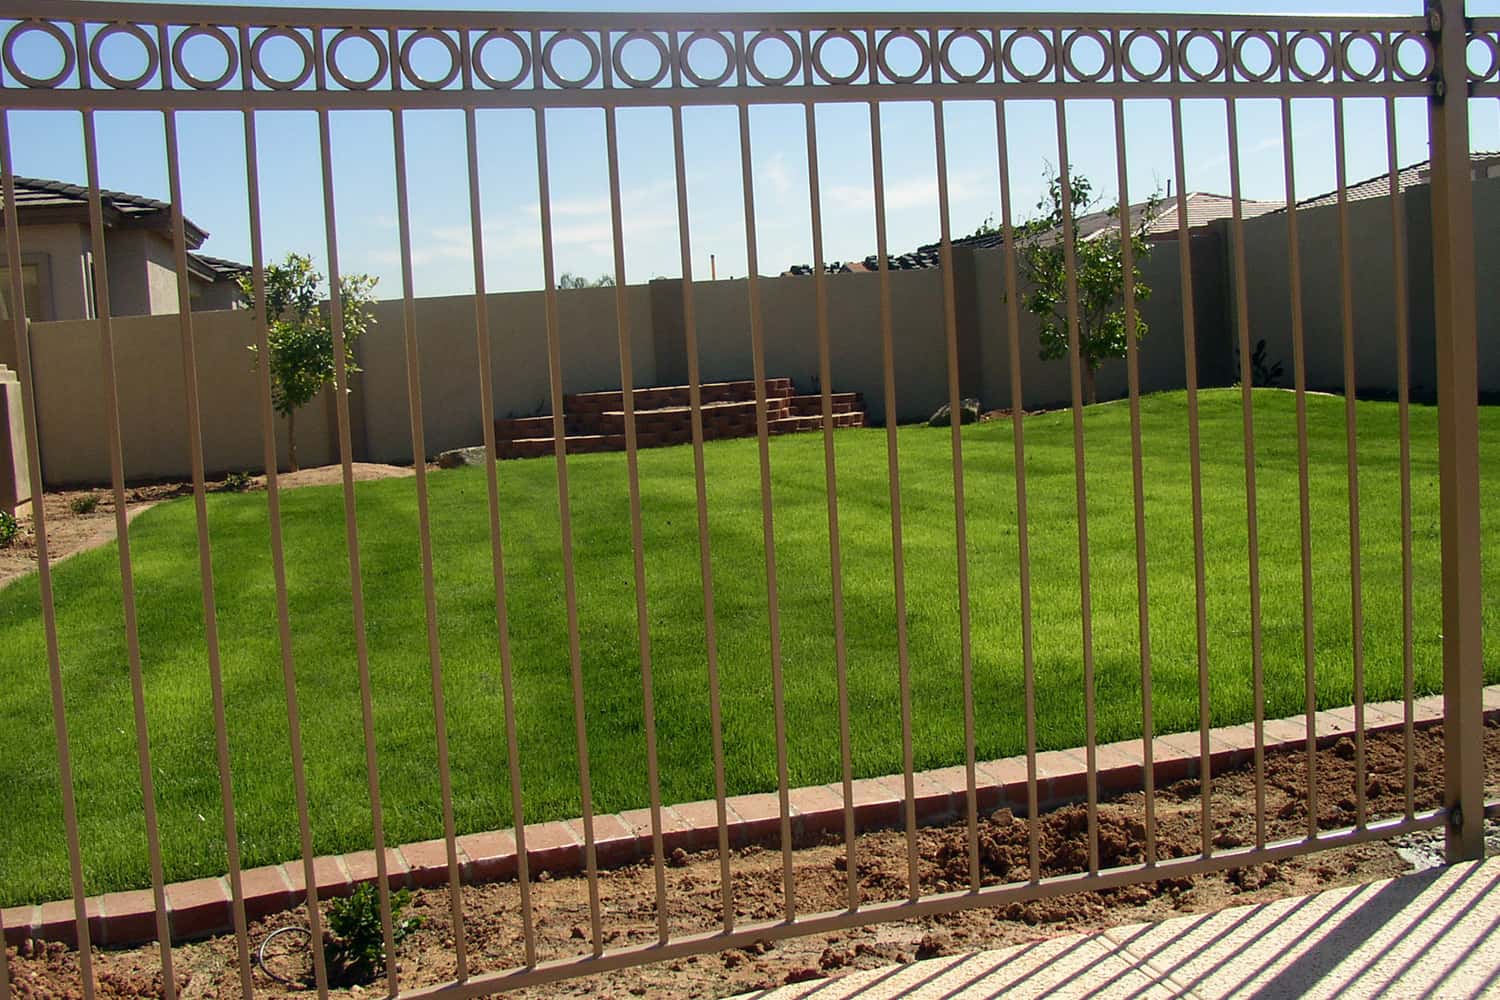 3-Rail Fencing with Rings